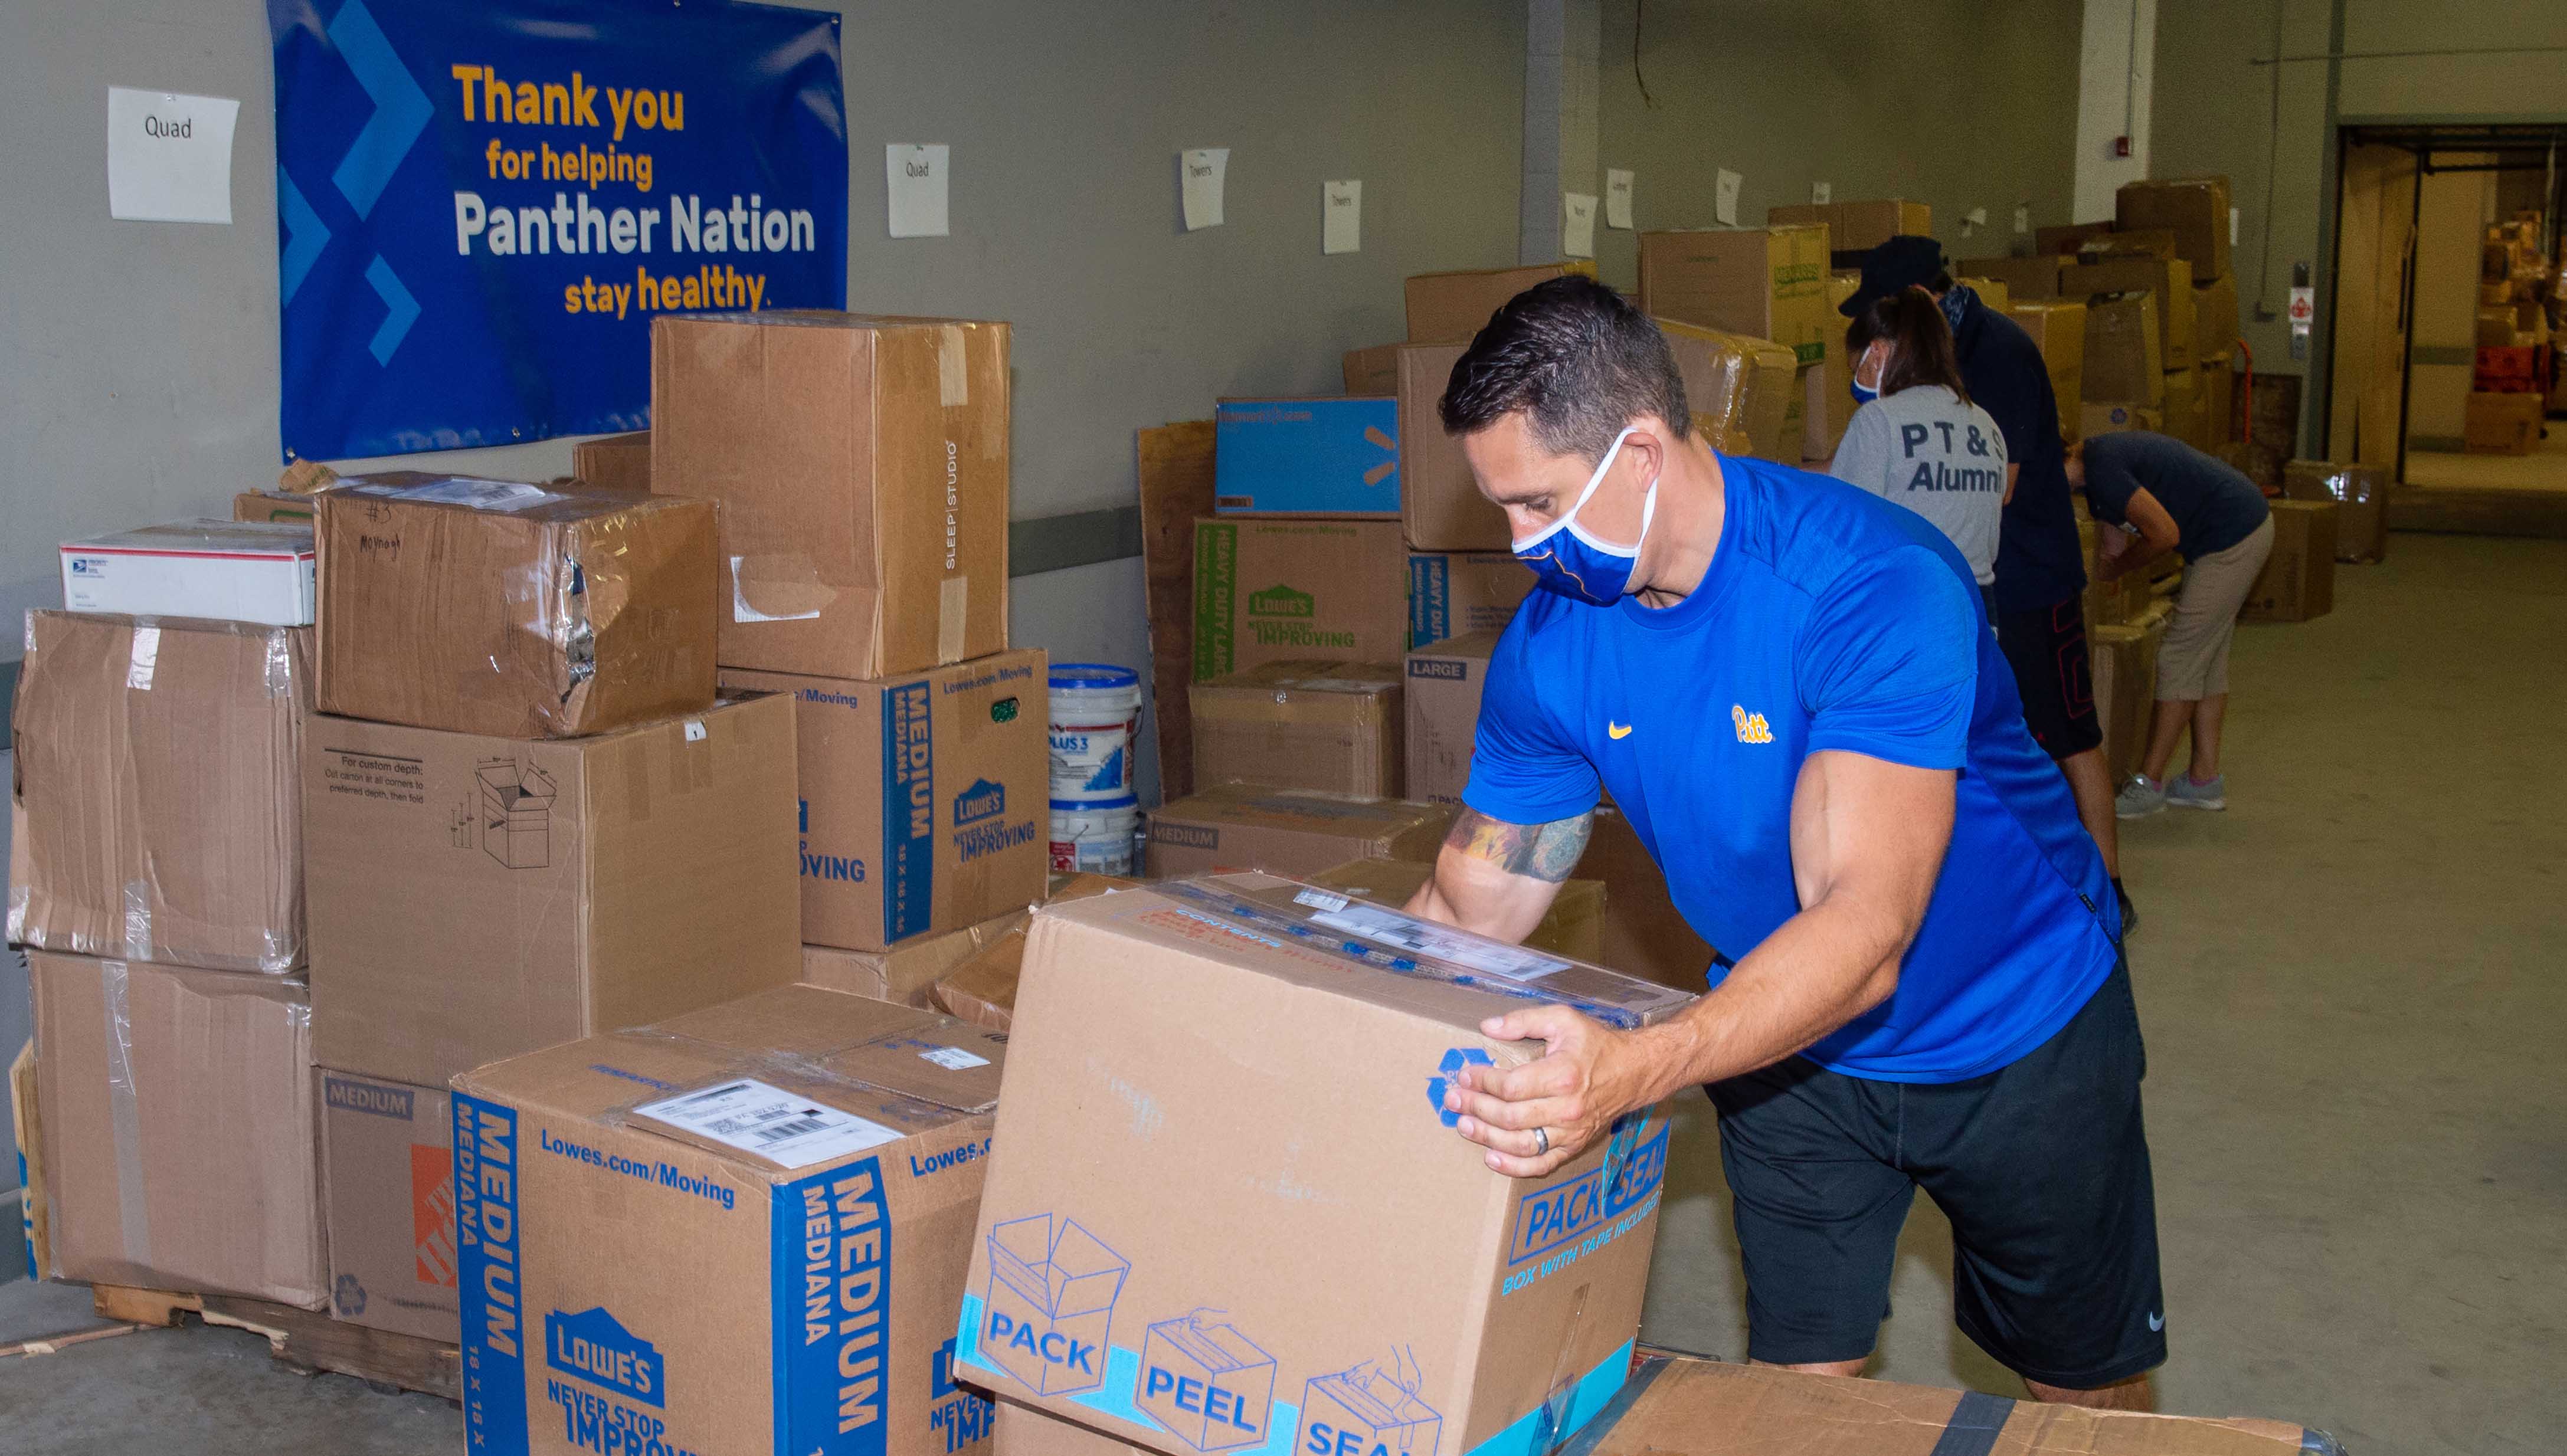 Staff sort through boxes sent to Pitt by students